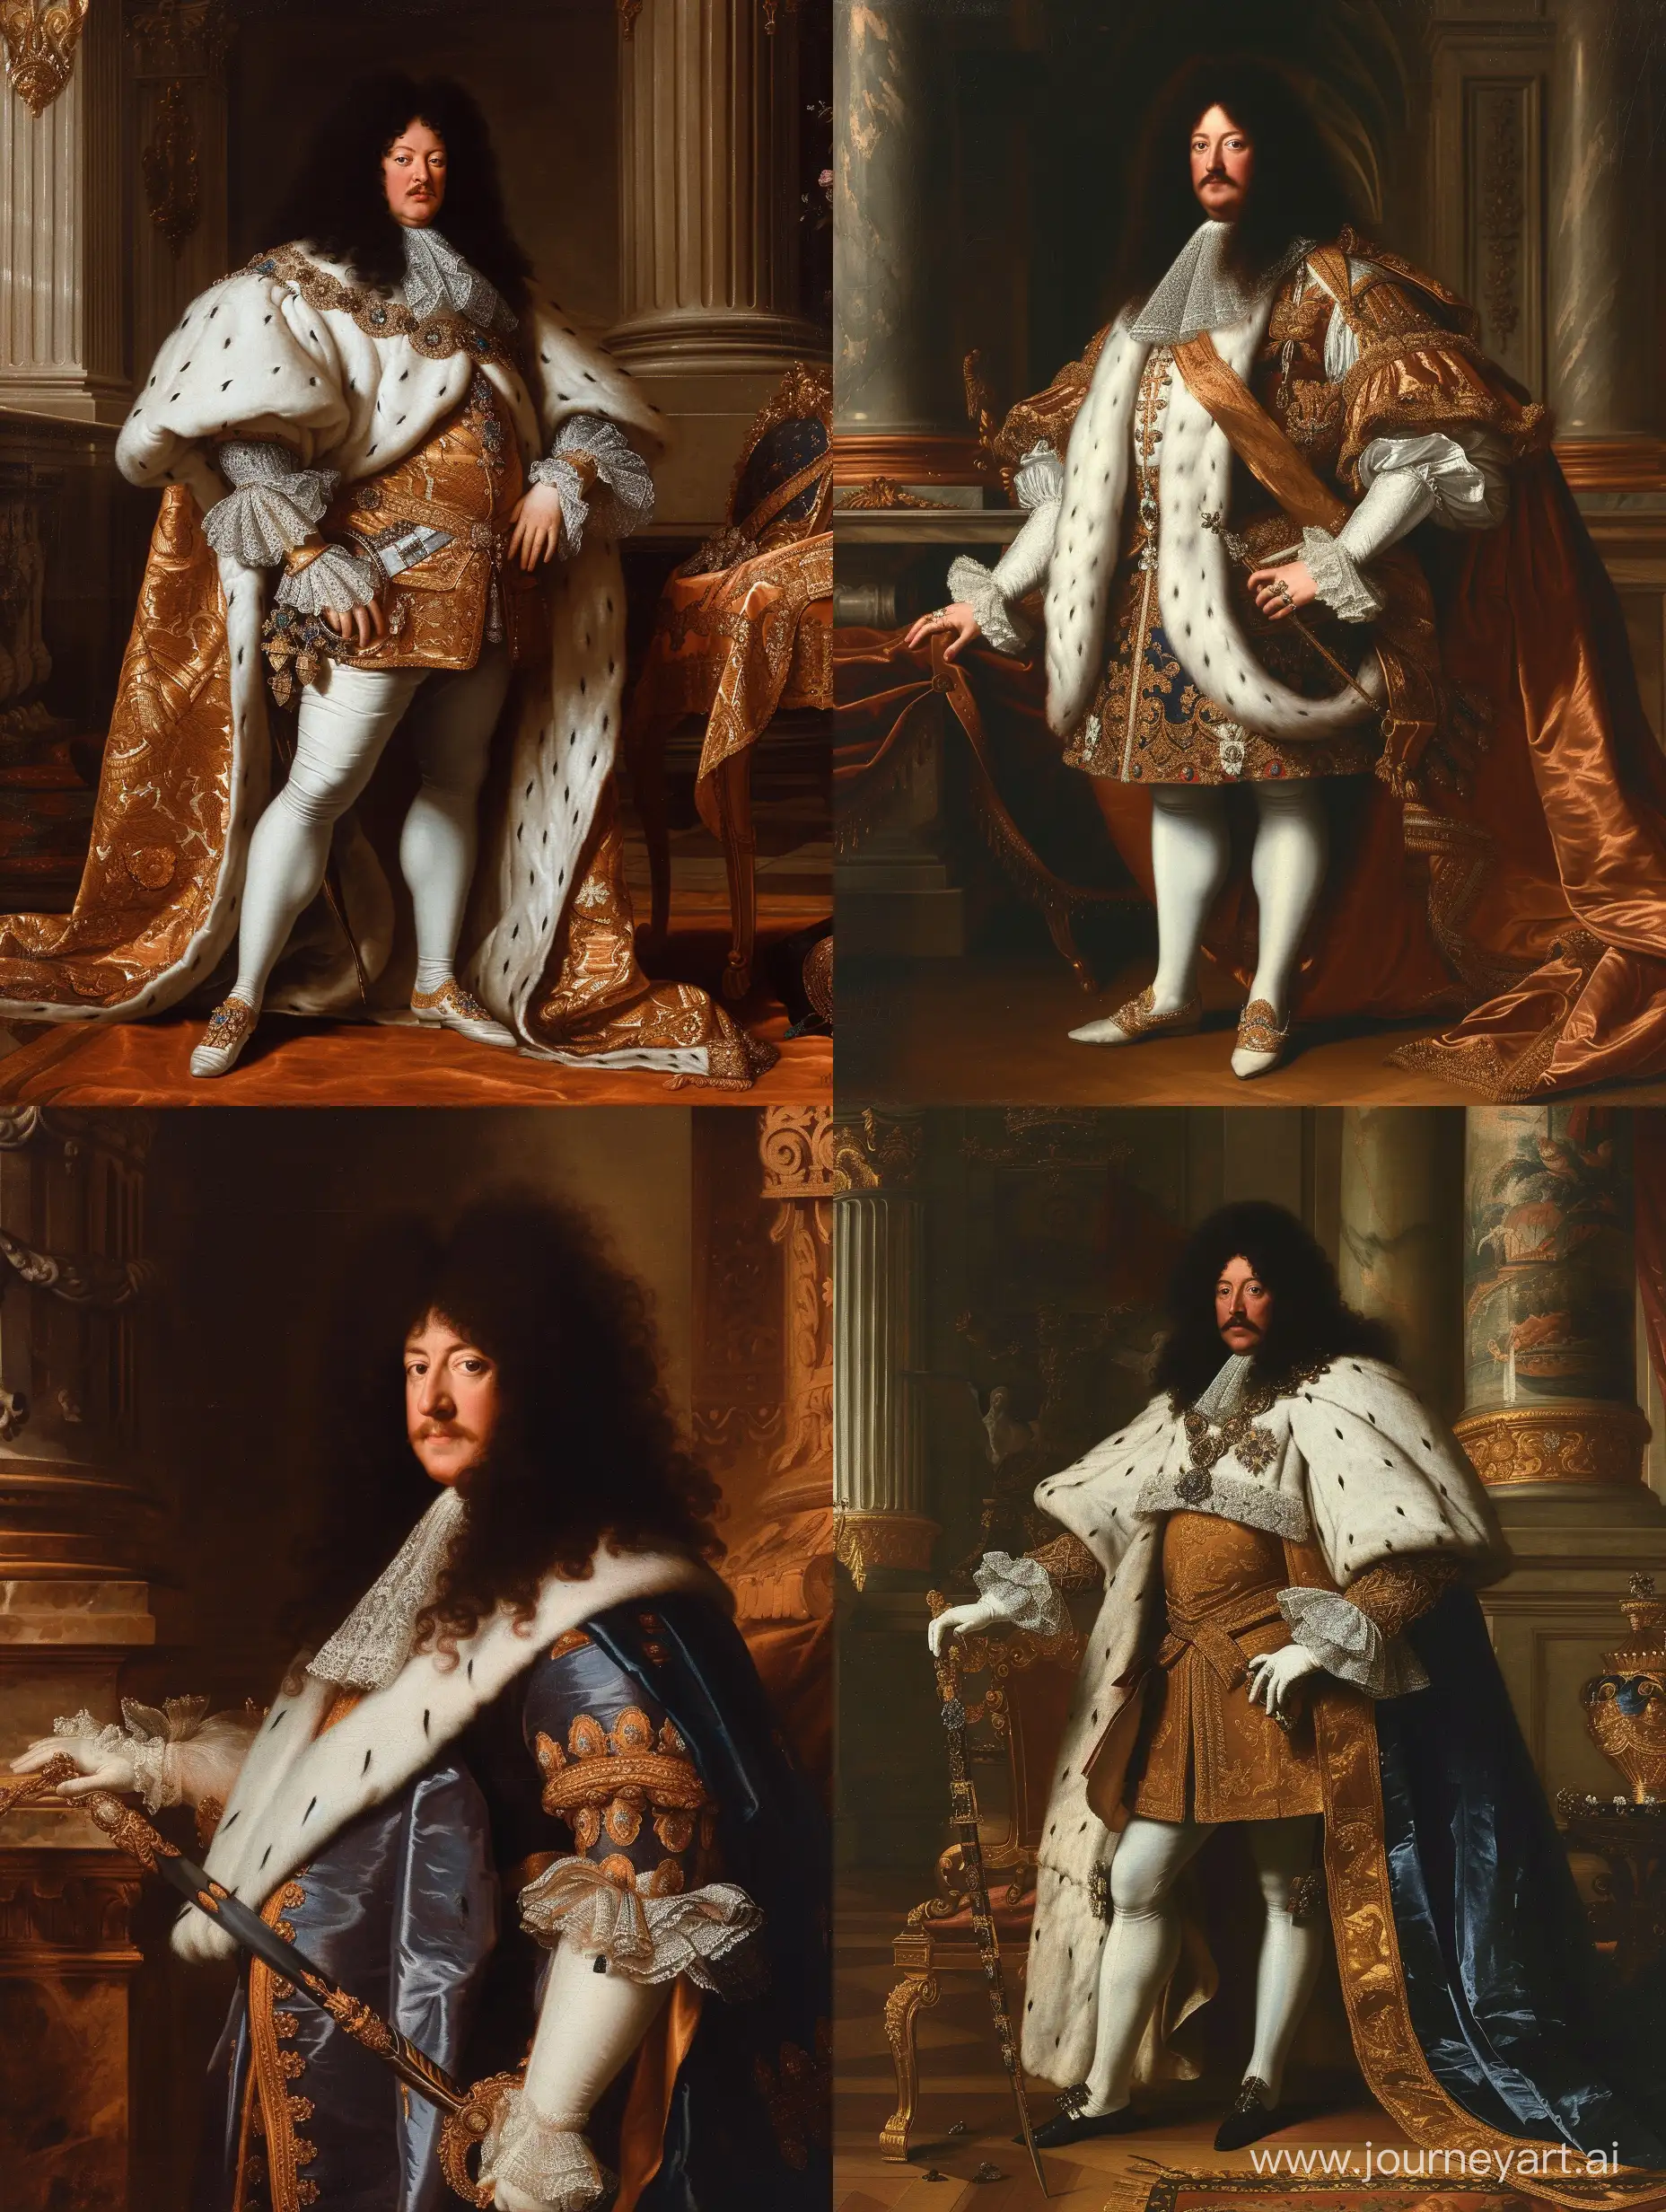 Full body portrait of King Louis XIV of France. In palace. Posing. 17th century. Wearing French king attire. Portrait style. --v 6 --ar 3:4 --no 75469